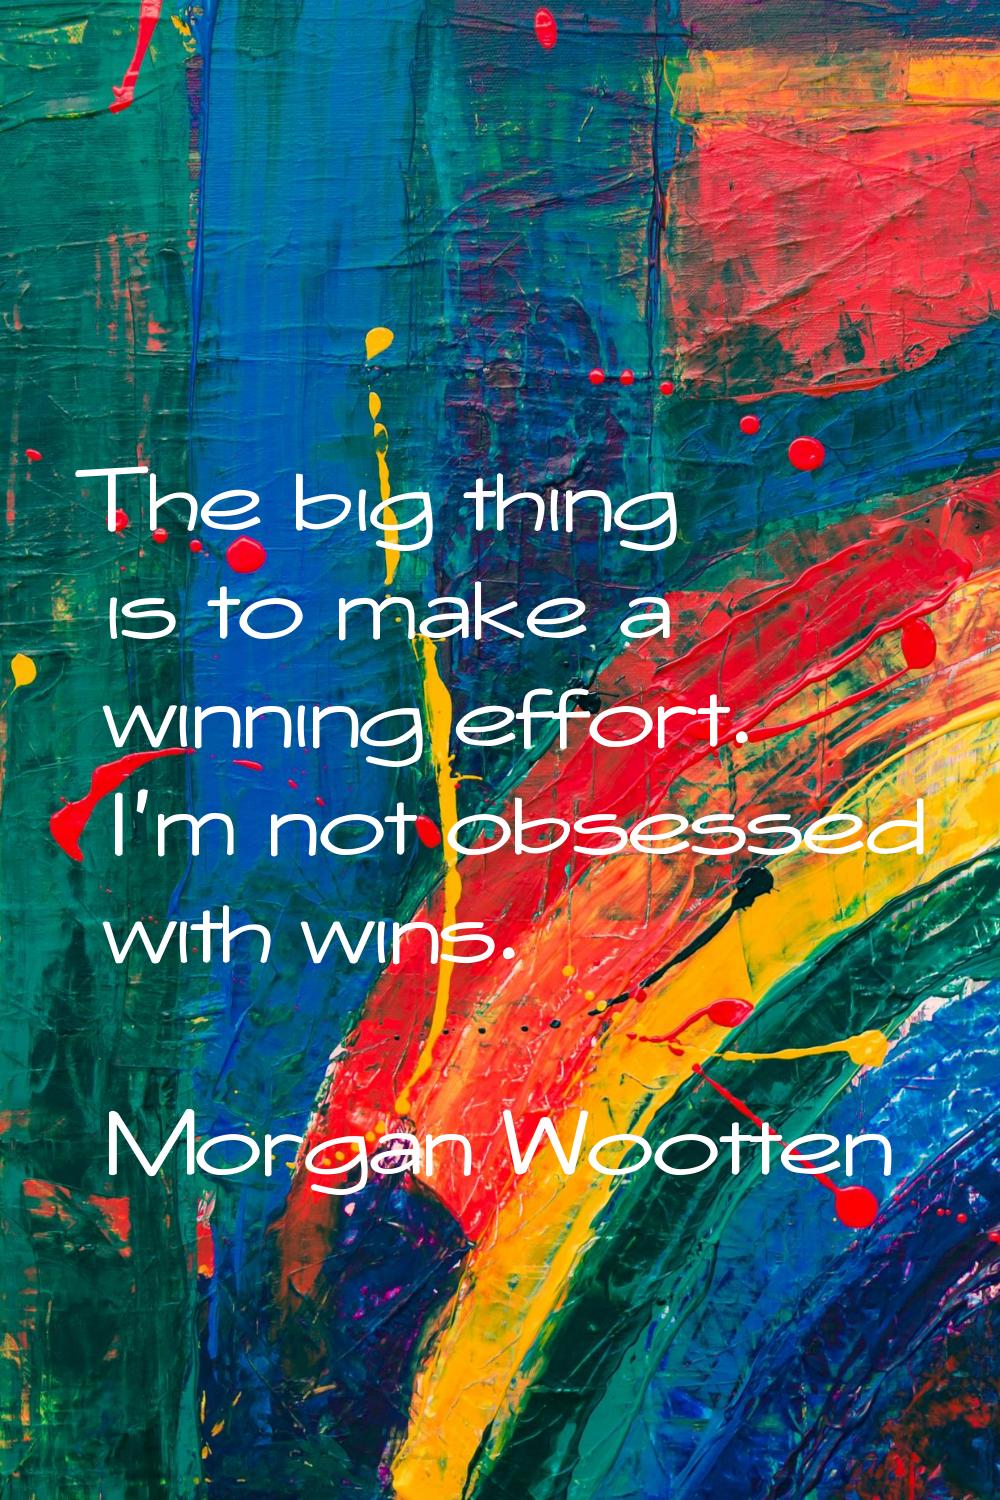 The big thing is to make a winning effort. I'm not obsessed with wins.